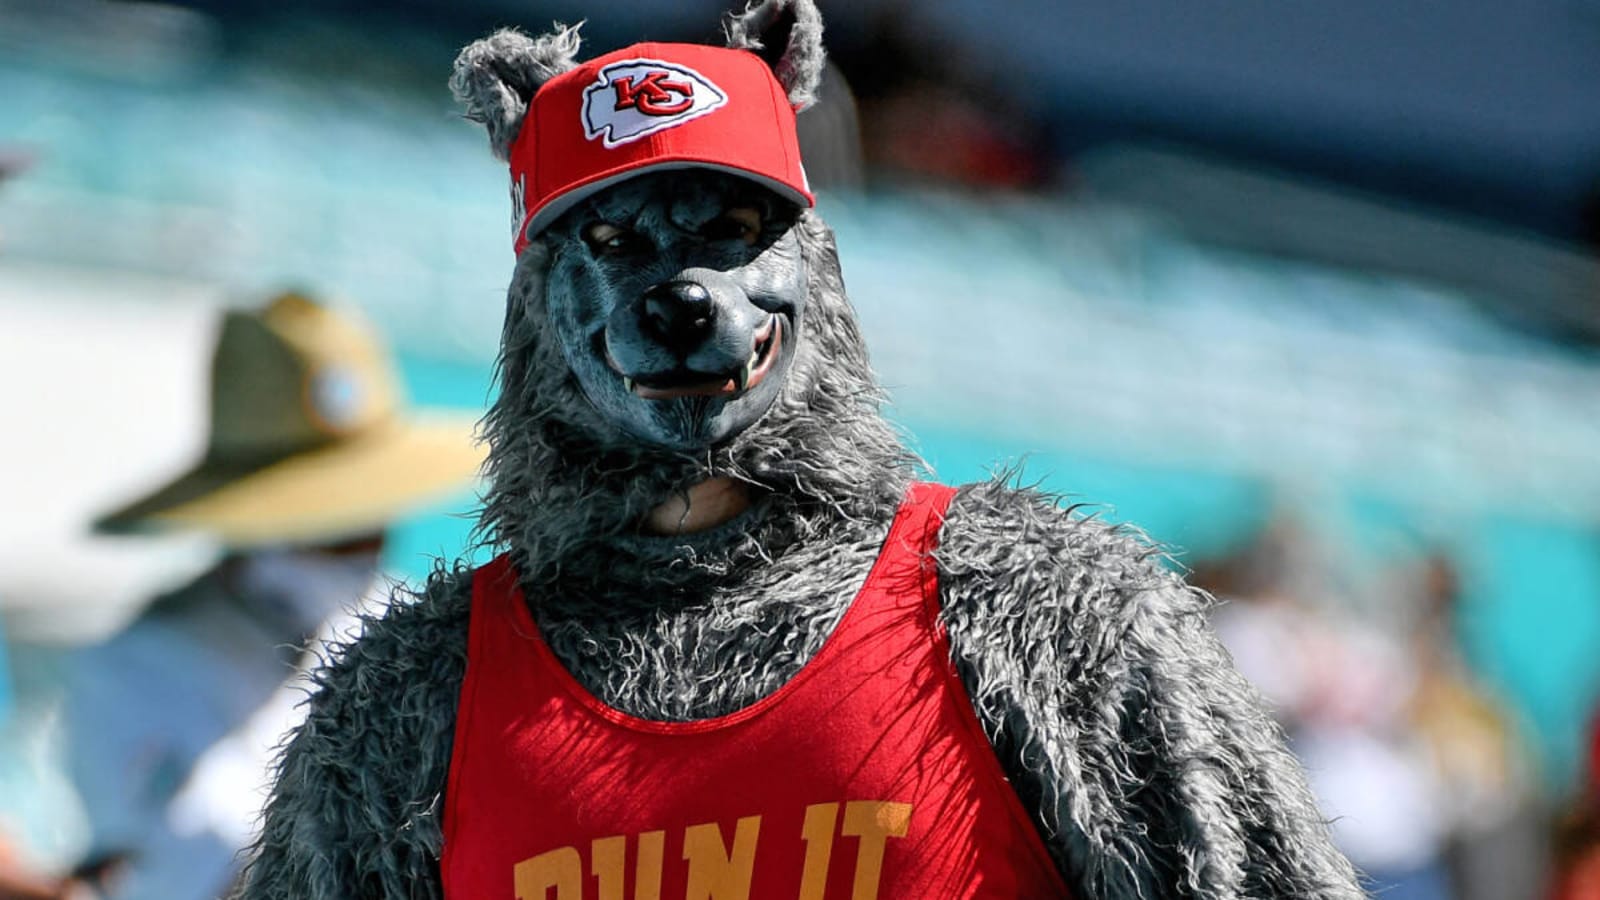 Drake to produce Amazon true-crime documentary on Chiefs superfan turned serial bank robber